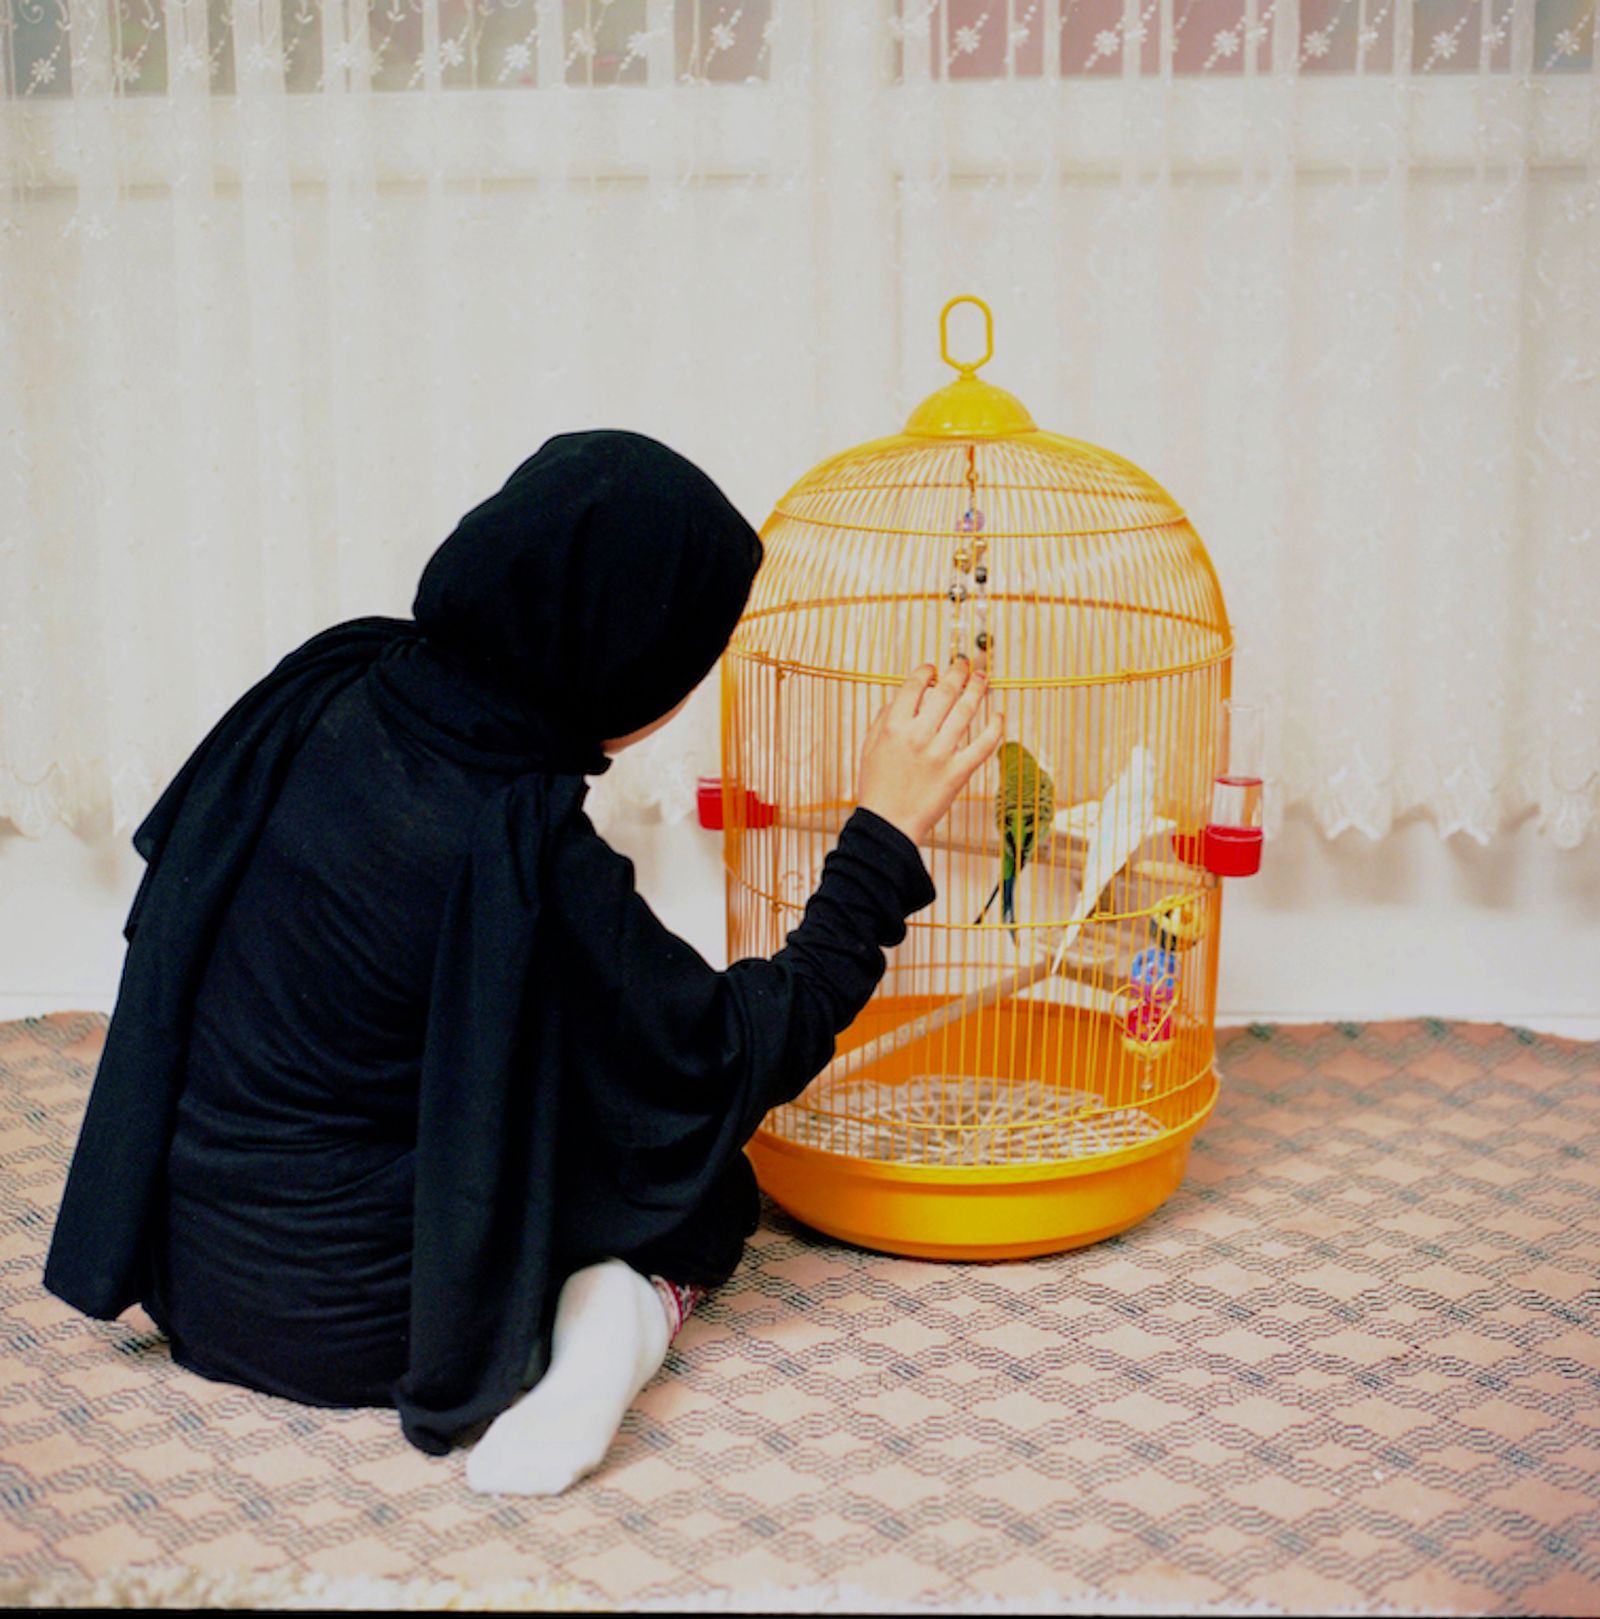 © Sabiha Çimen - Yellow Bird Cage. Turkey-Rize Asya is playing with lovebirds in the cage in Hodja’s room.